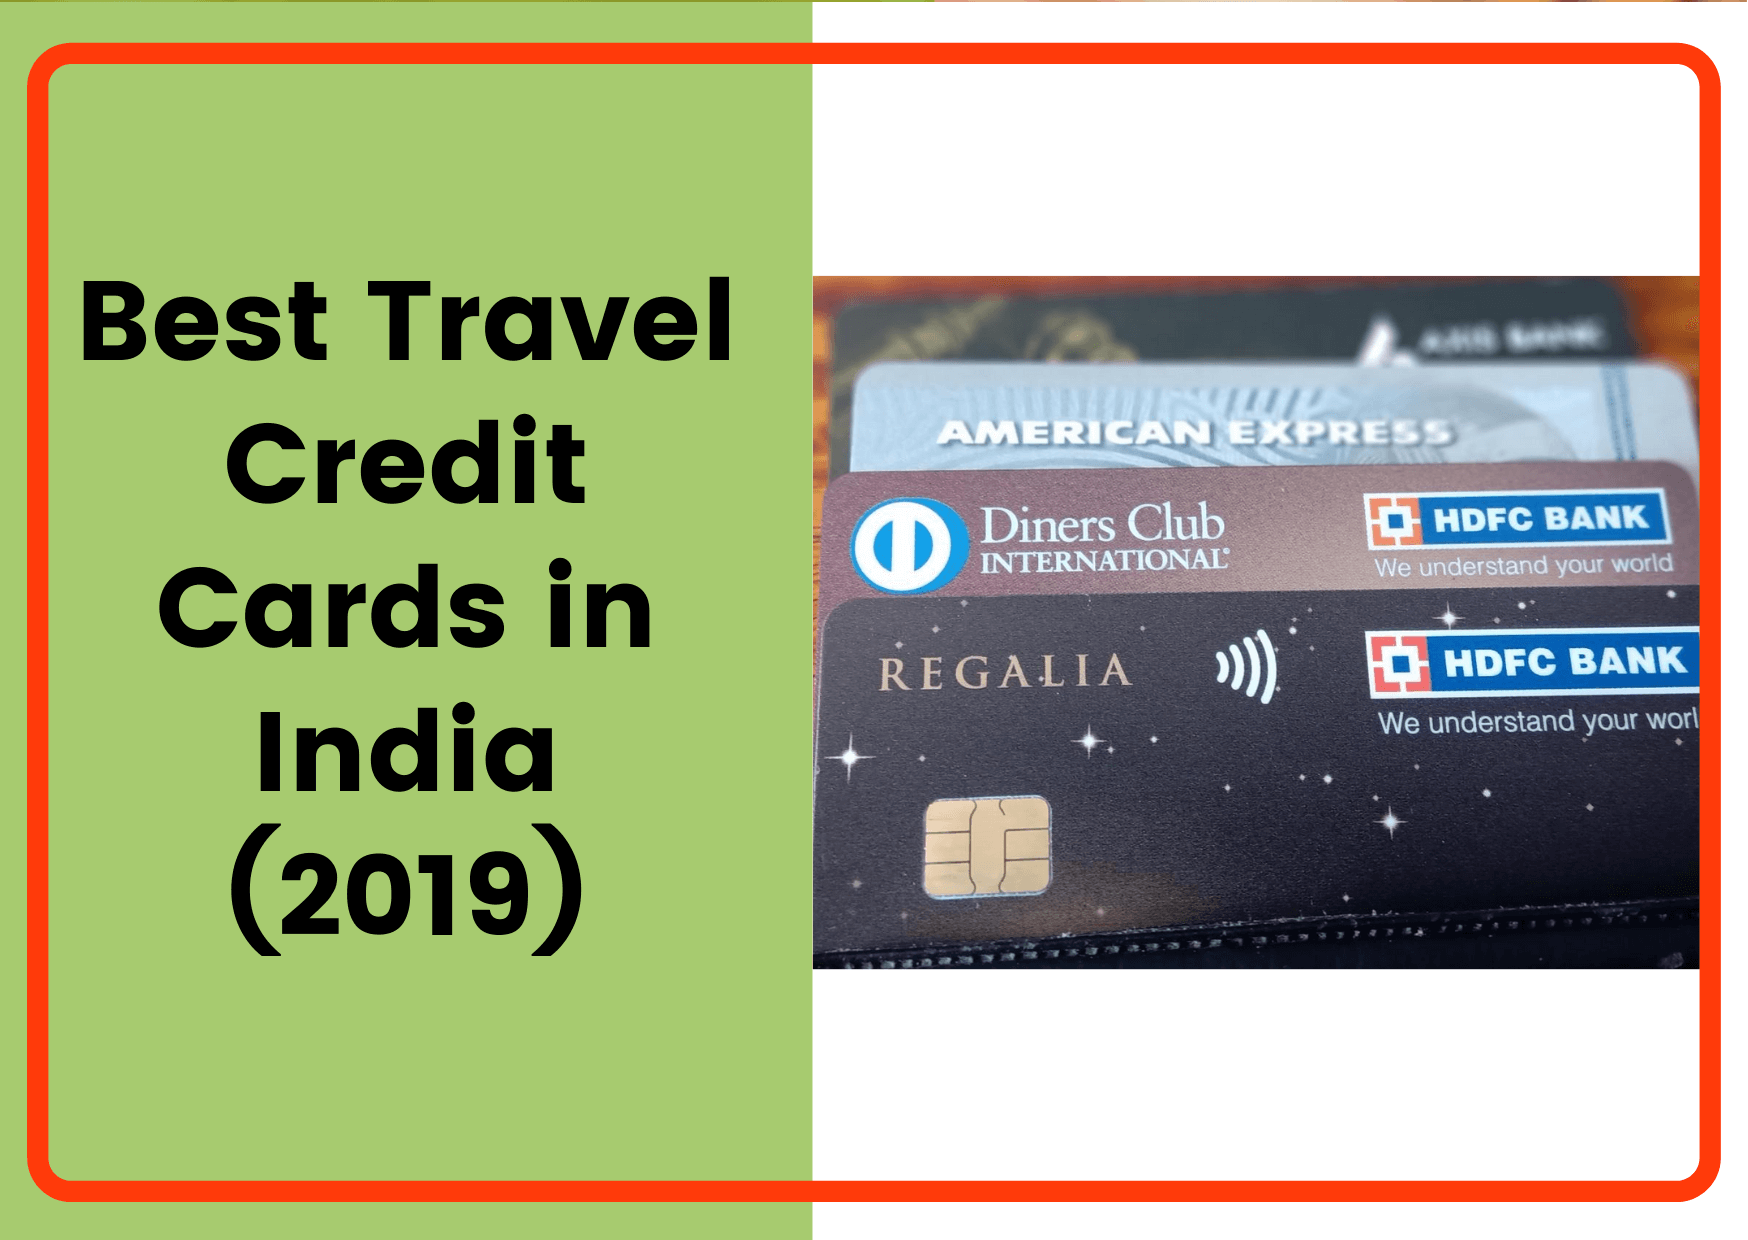 Best Travel Credit Cards in India (Nov 2019) Review and Comparison